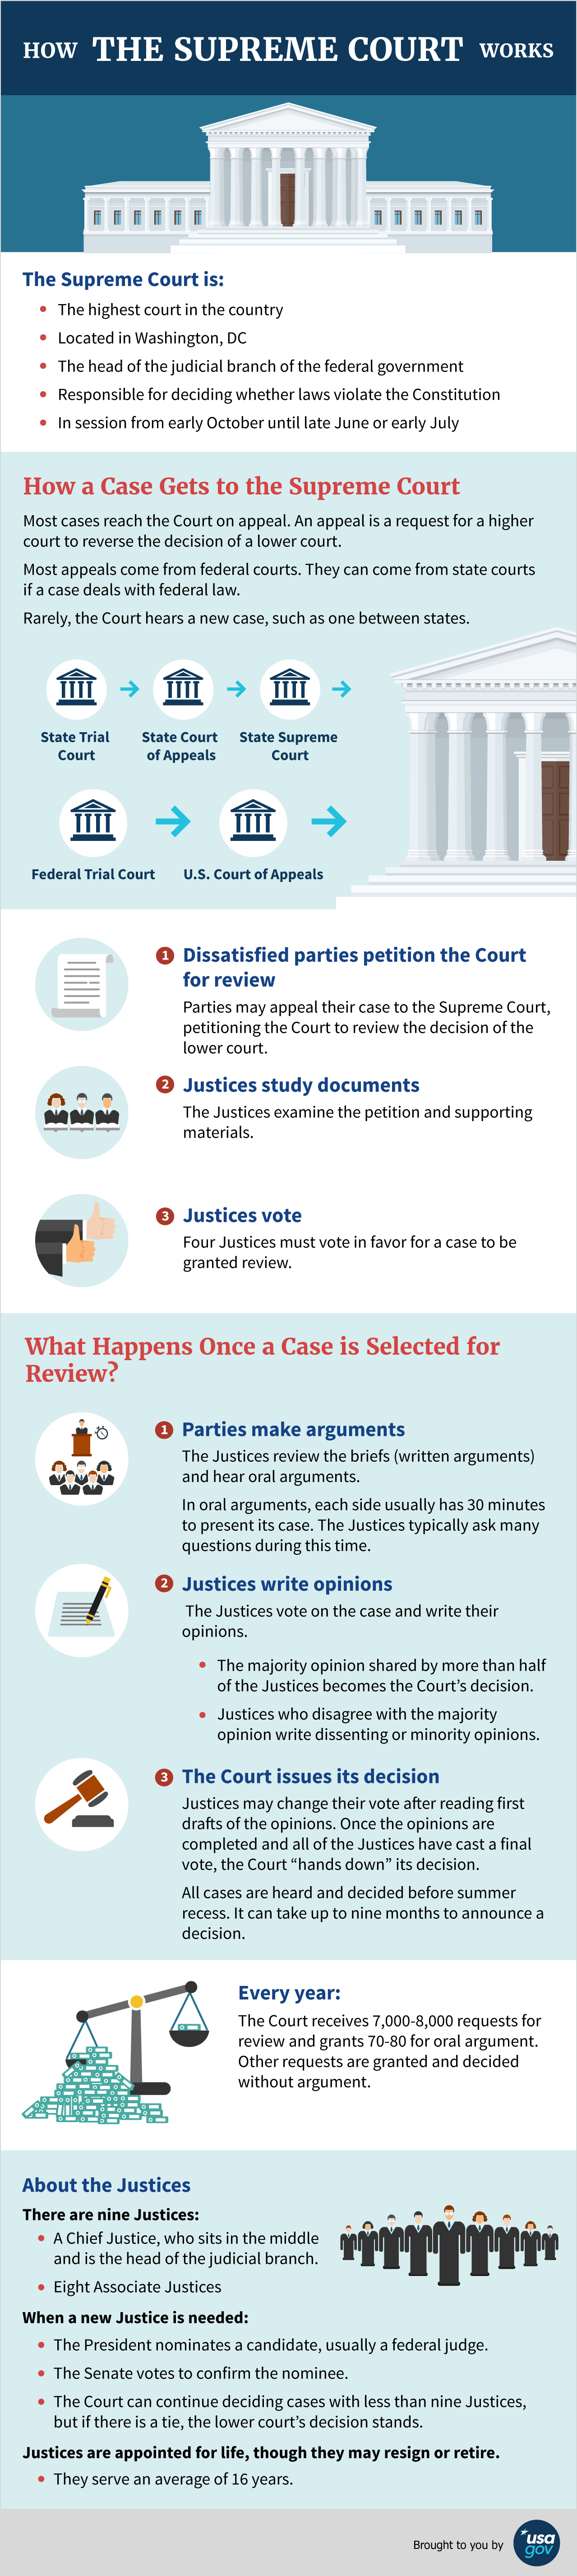 How the Supreme Court Works infographic. See description below.